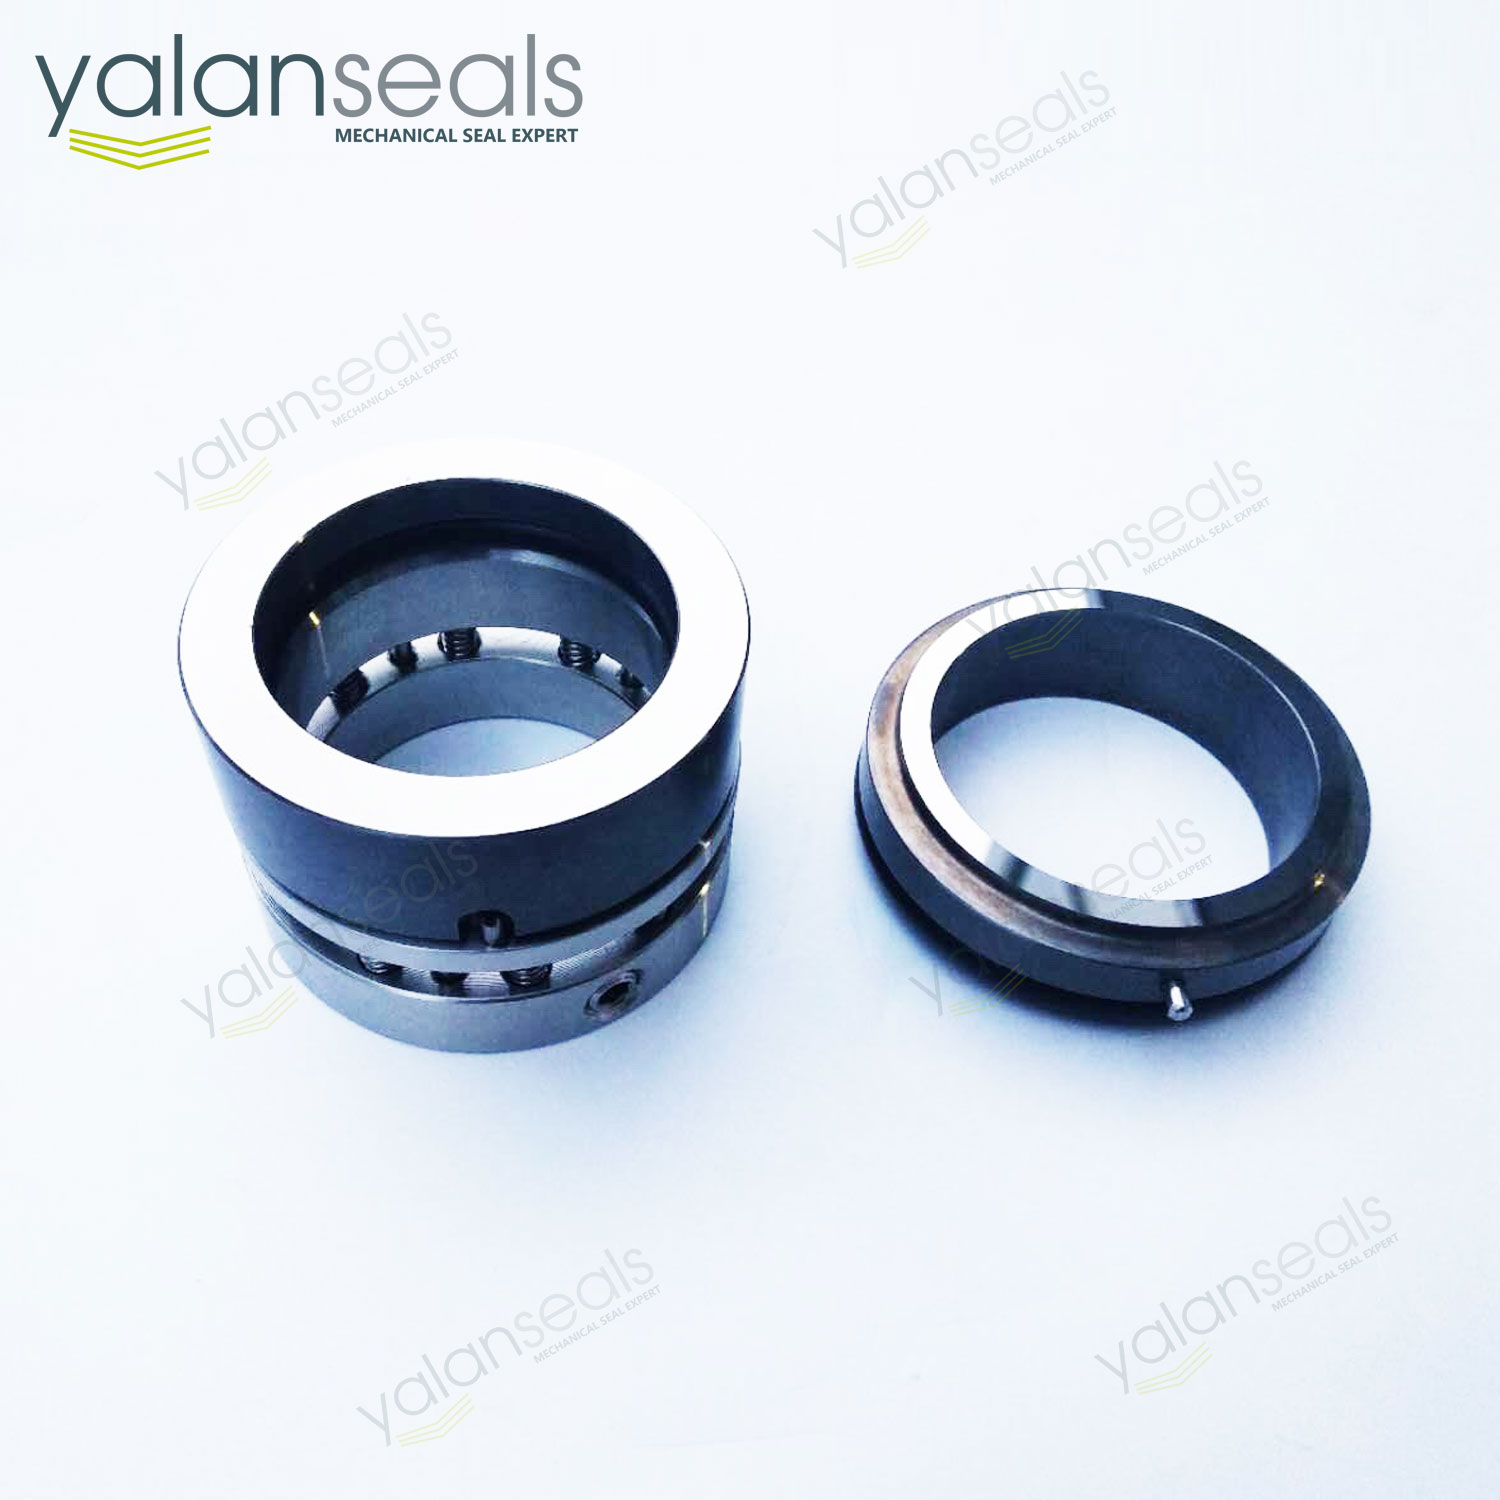 Type RO Pusher Mechanical Seal for Mixers